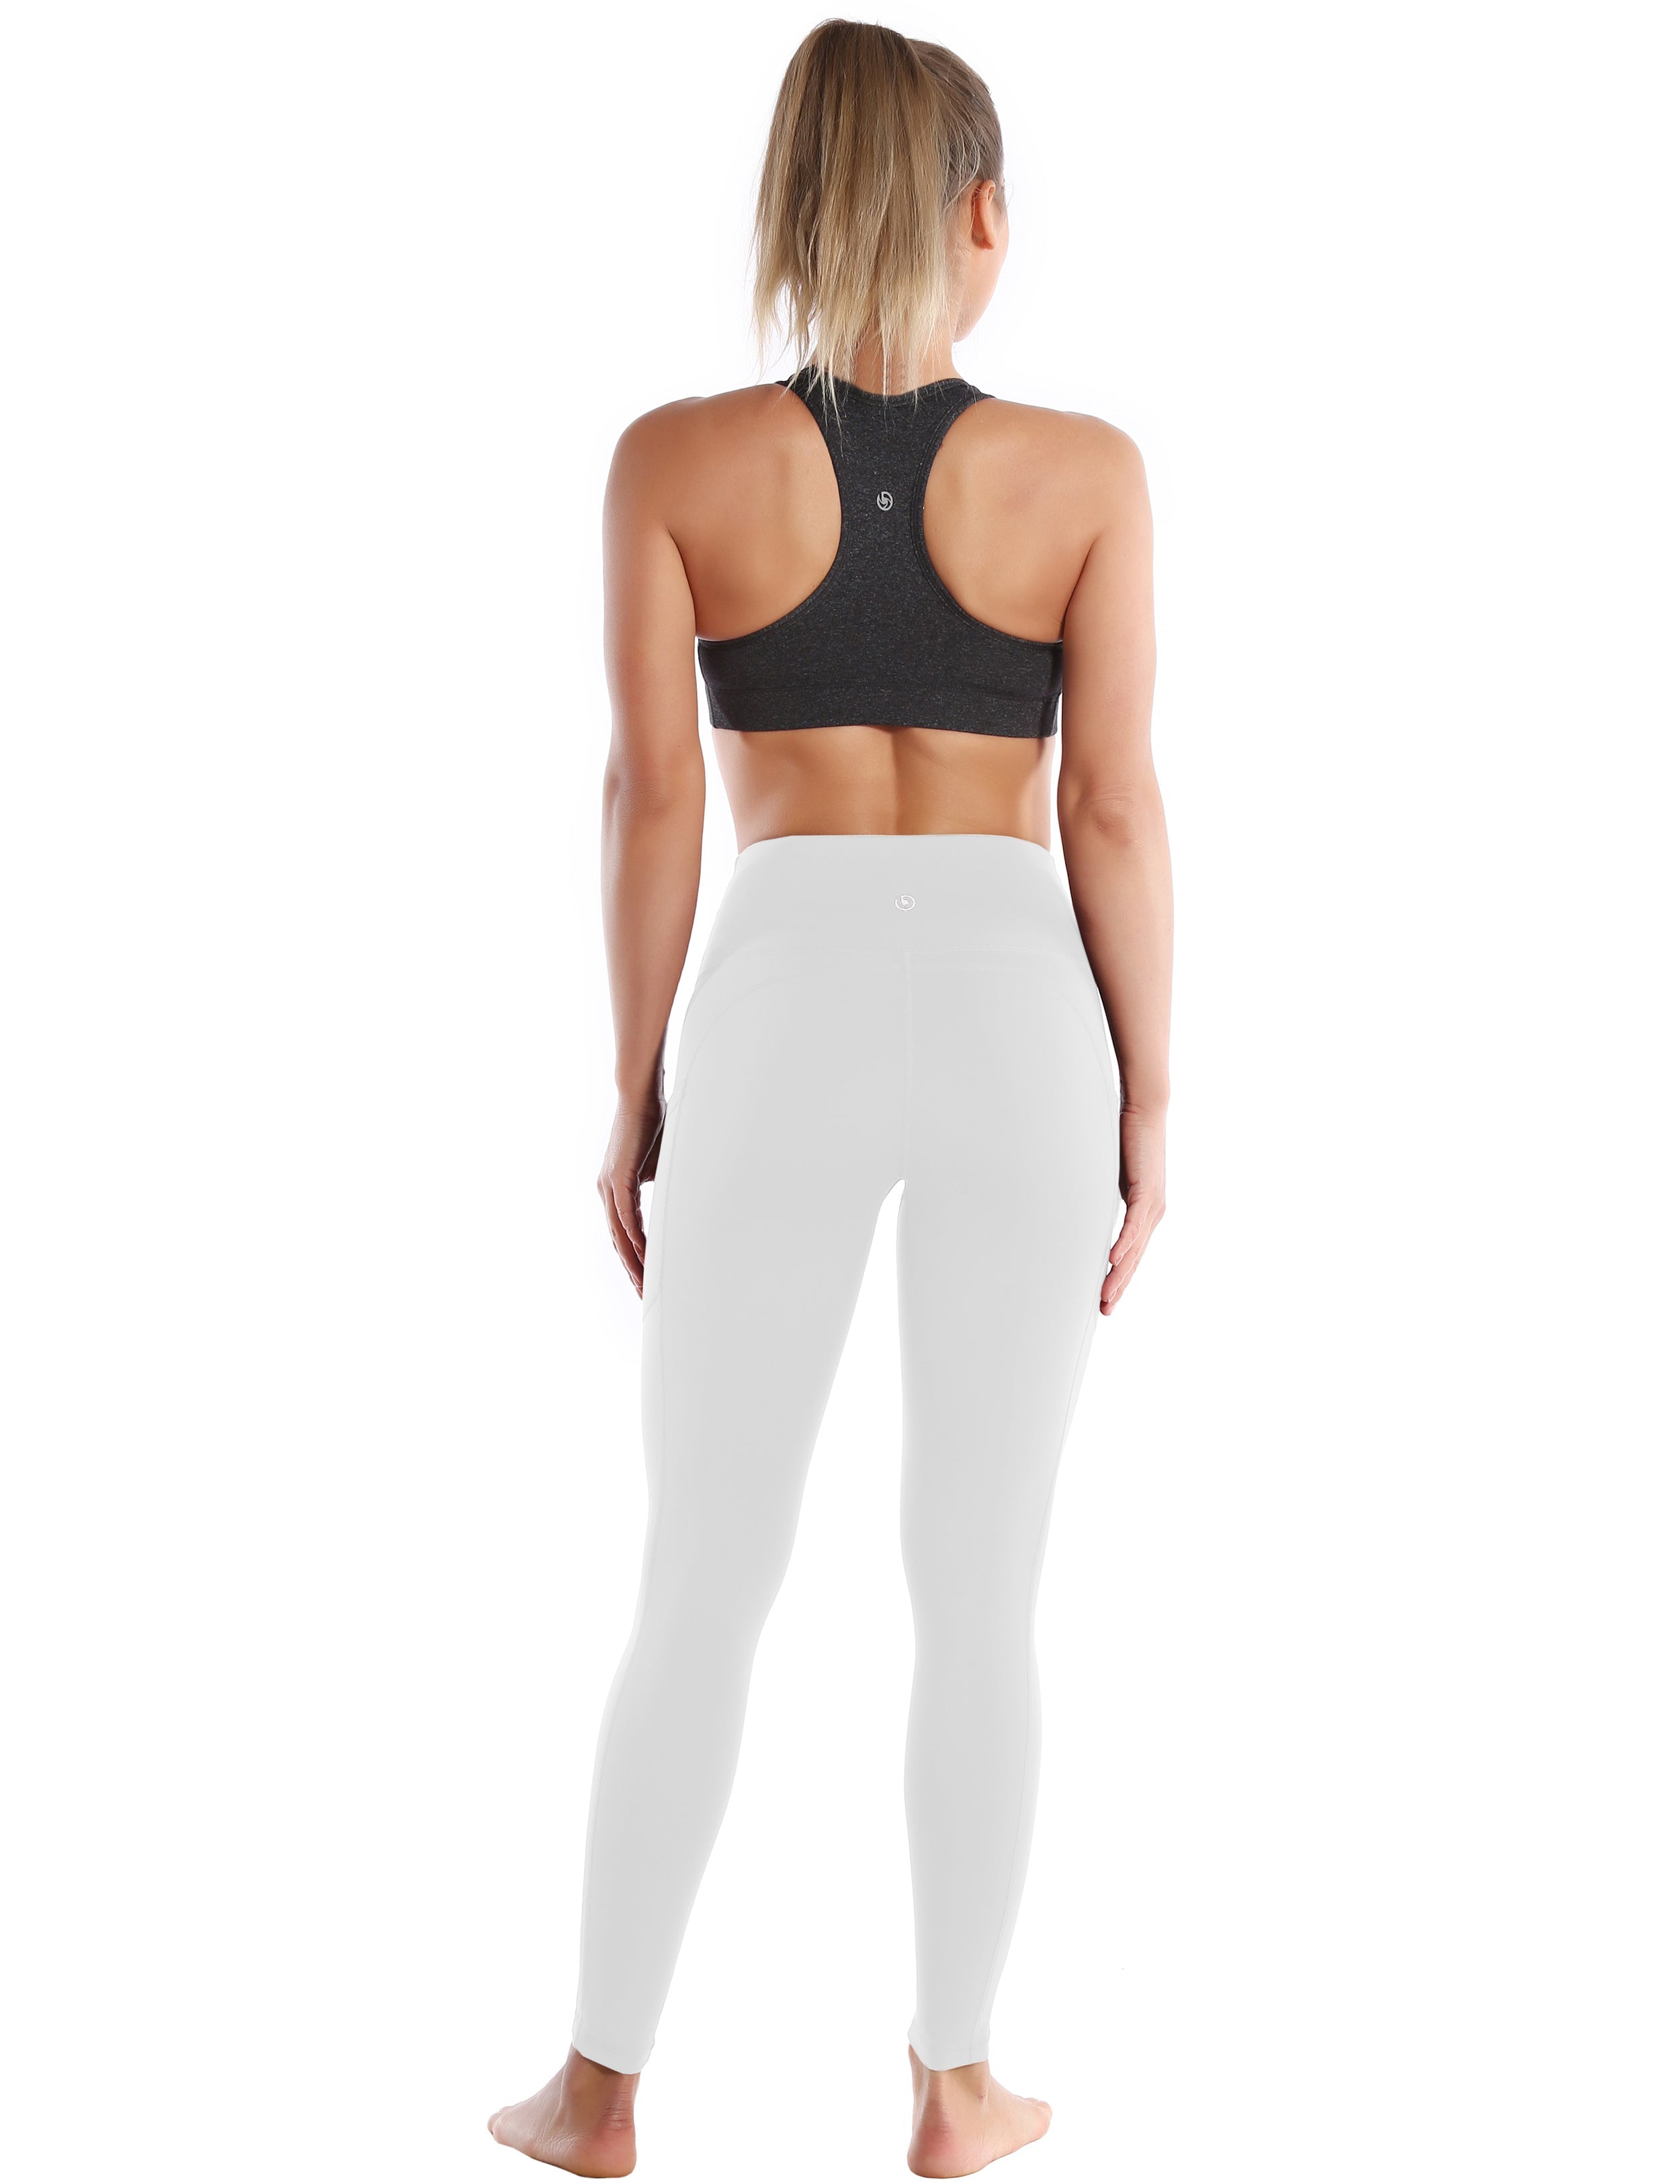 Hip Line Side Pockets Jogging Pants lightgray Sexy Hip Line Side Pockets 75%Nylon/25%Spandex Fabric doesn't attract lint easily 4-way stretch No see-through Moisture-wicking Tummy control Inner pocket Two lengths